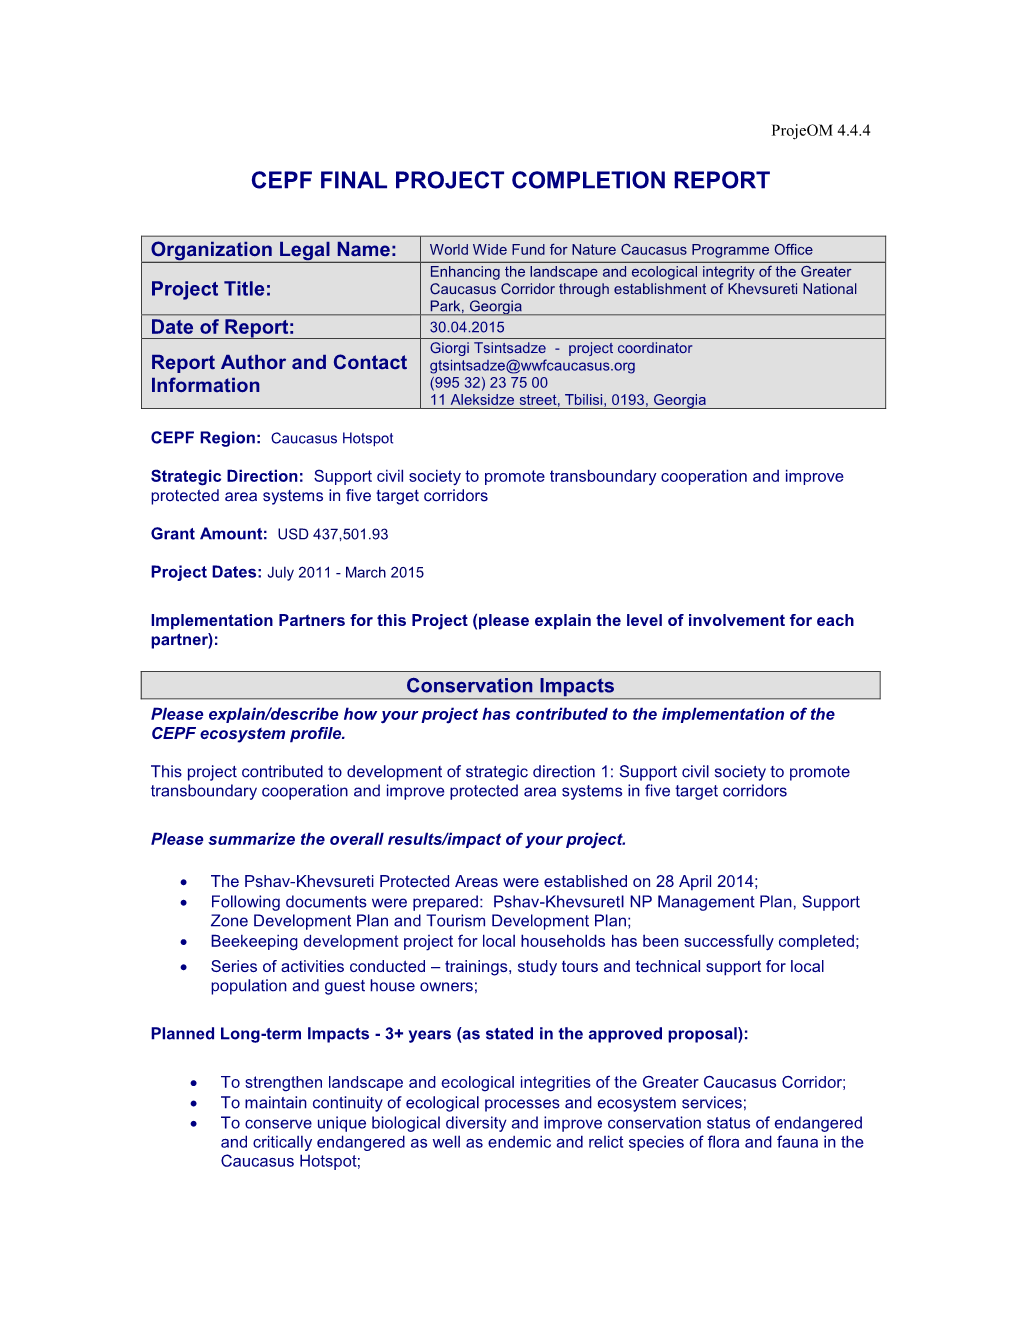 Final Project Completion Report